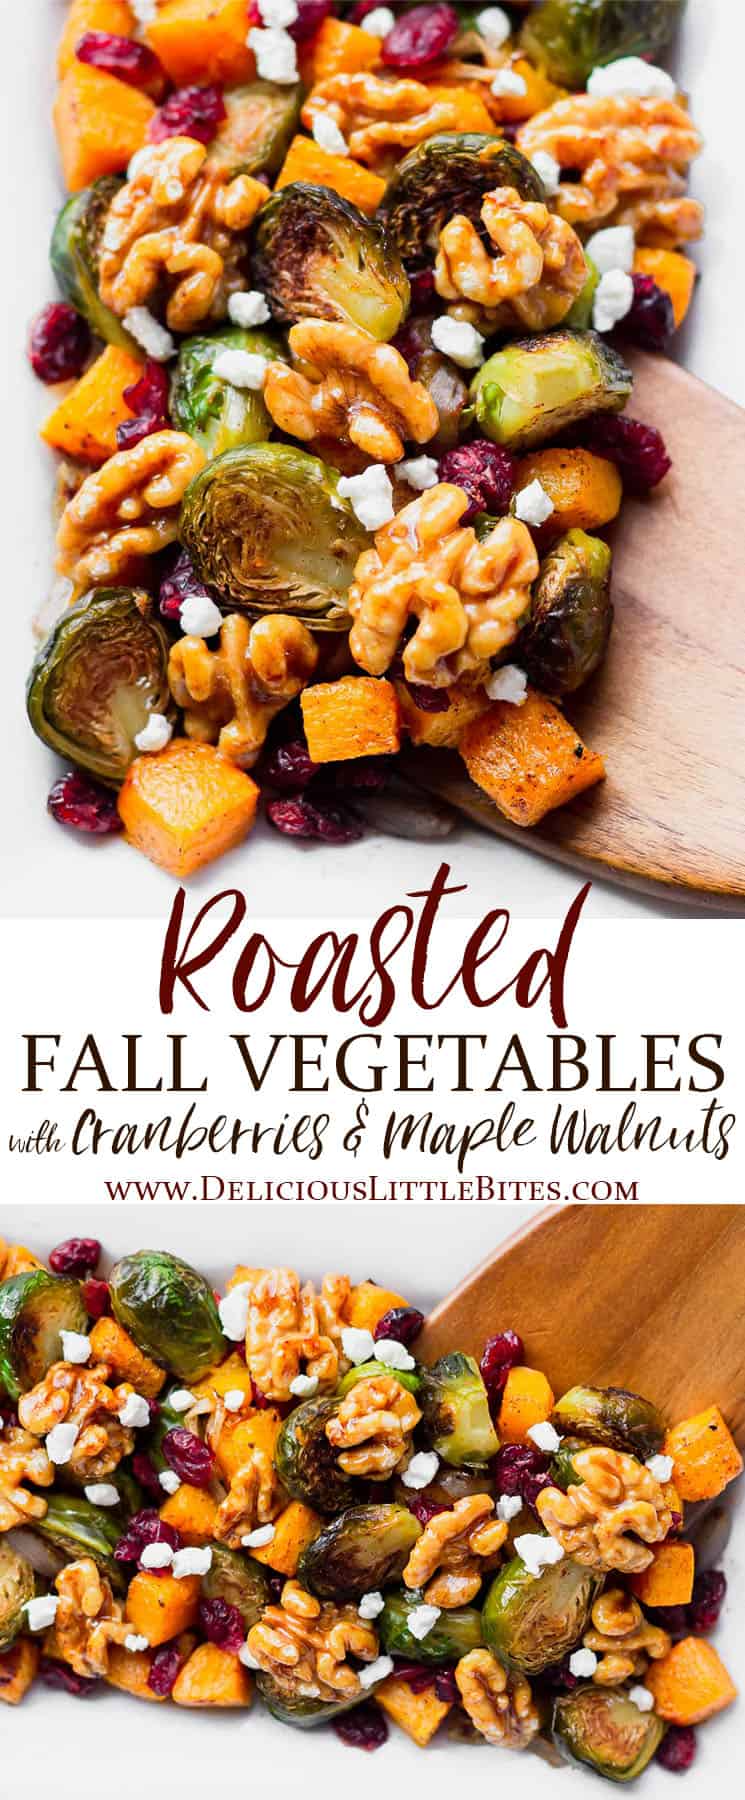 Roasted Fall Vegetables (with Cranberries & Maple Walnuts) - Delicious Little Bites - Roasted Fall Vegetables (with Cranberries & Maple Walnuts) - Delicious Little Bites -   21 thanksgiving recipes side dishes easy ideas